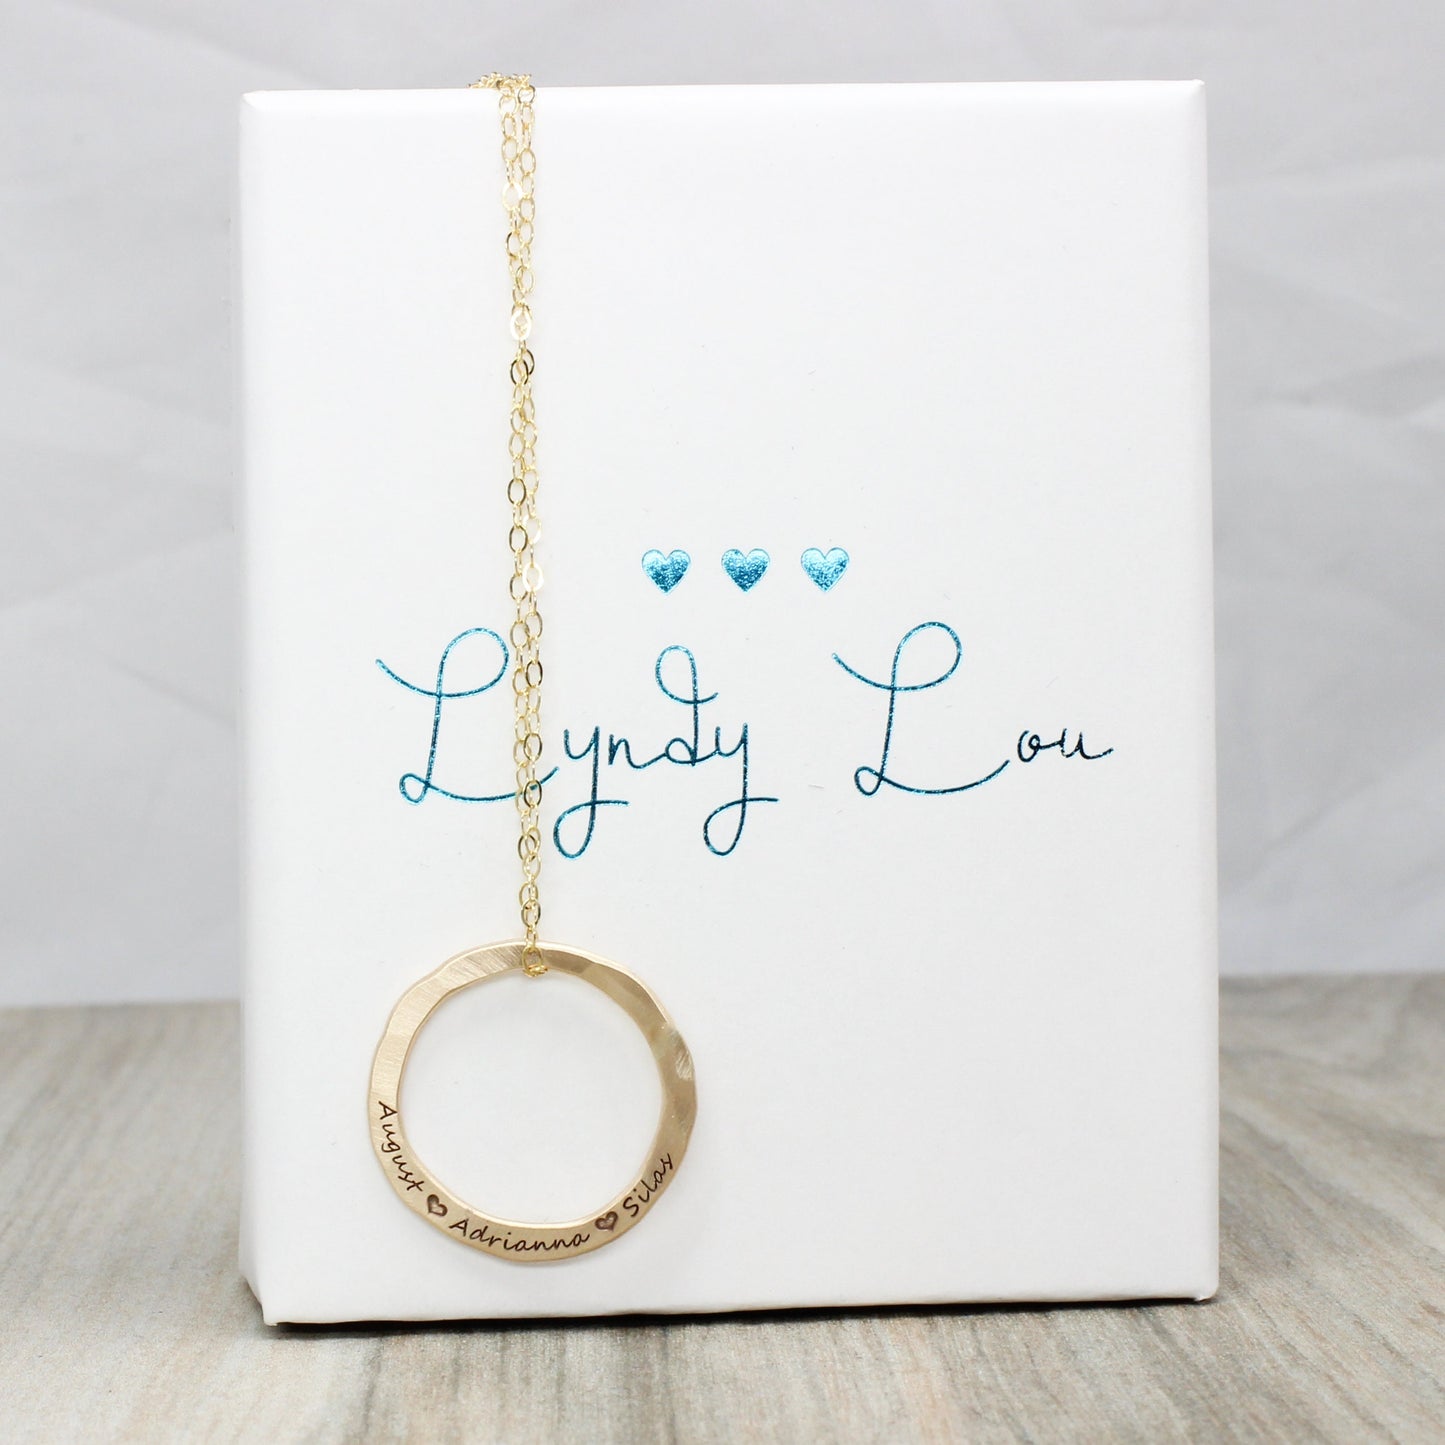 Custom Engraved Sterling Silver Hammered Circle Necklace